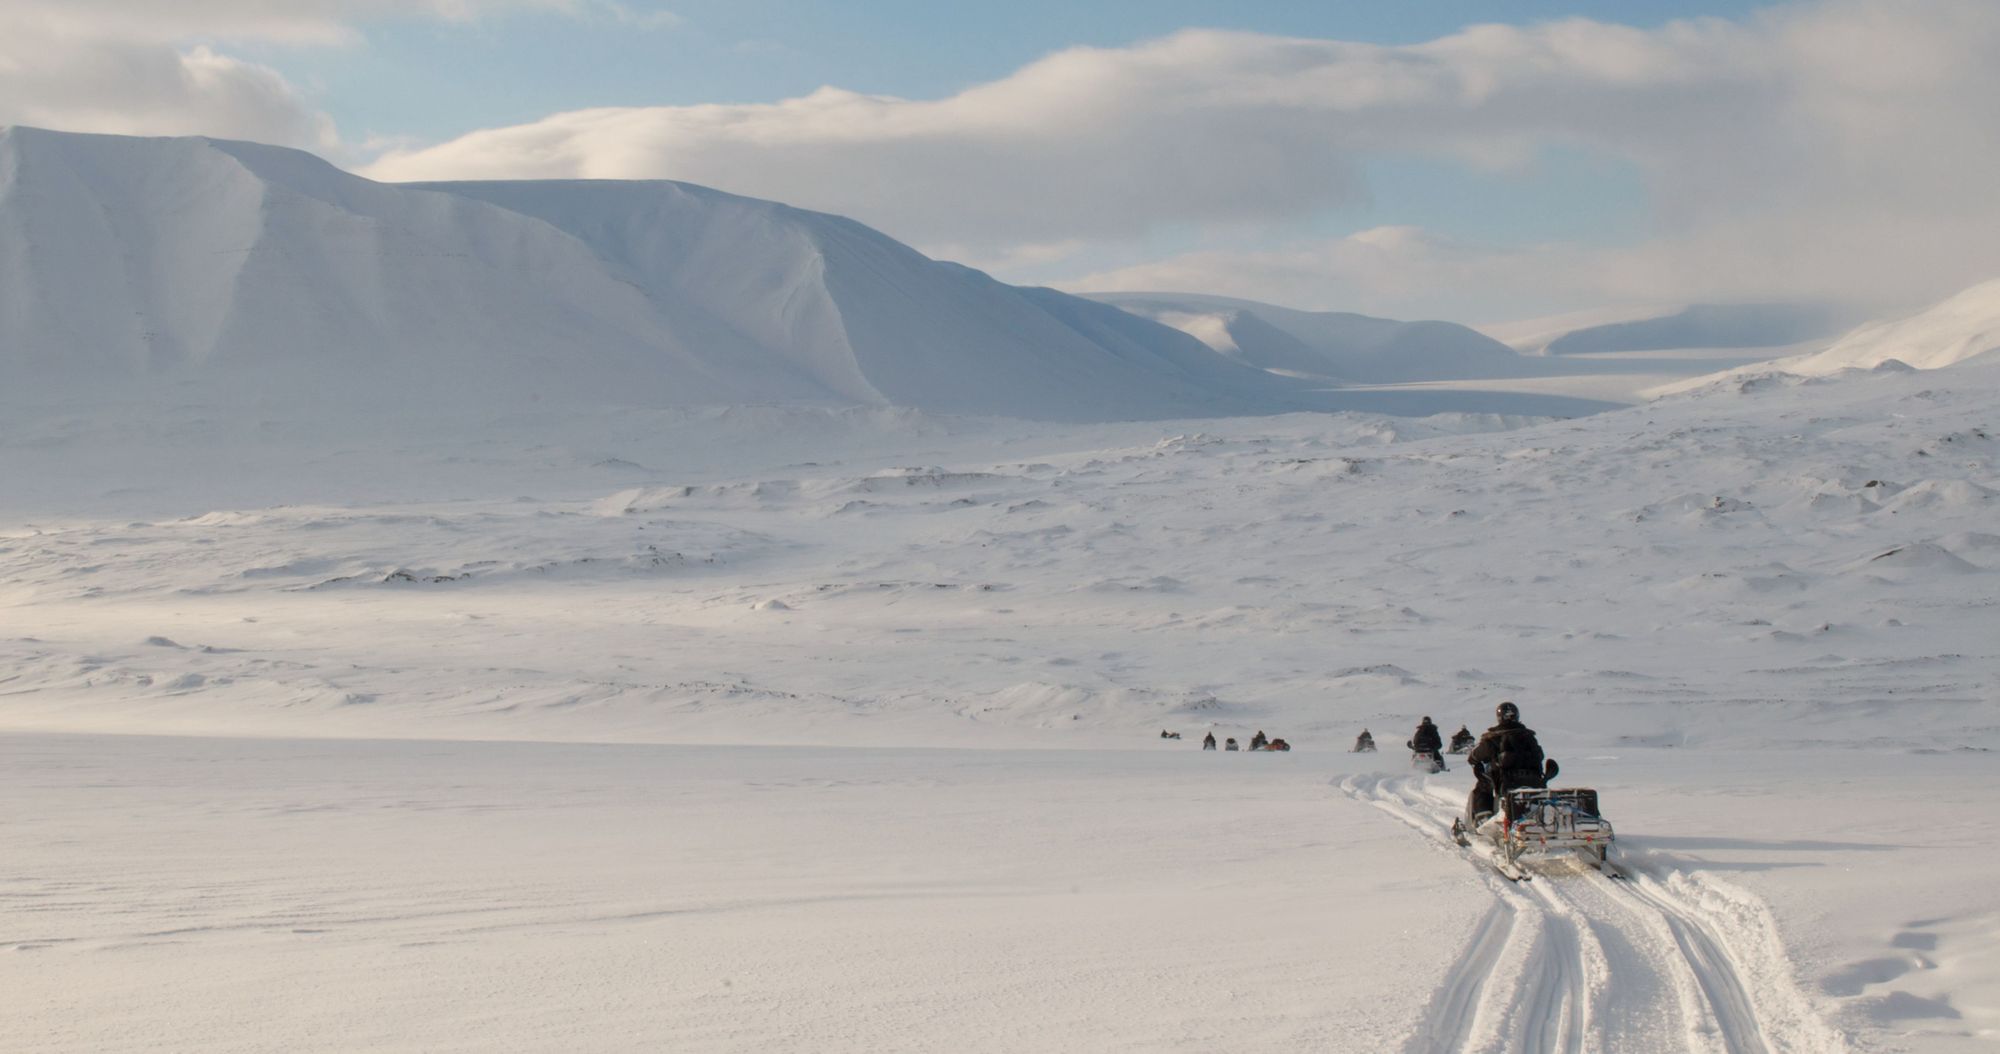 A snowmobile expedition travels across the snowy landscape of Svalbard.